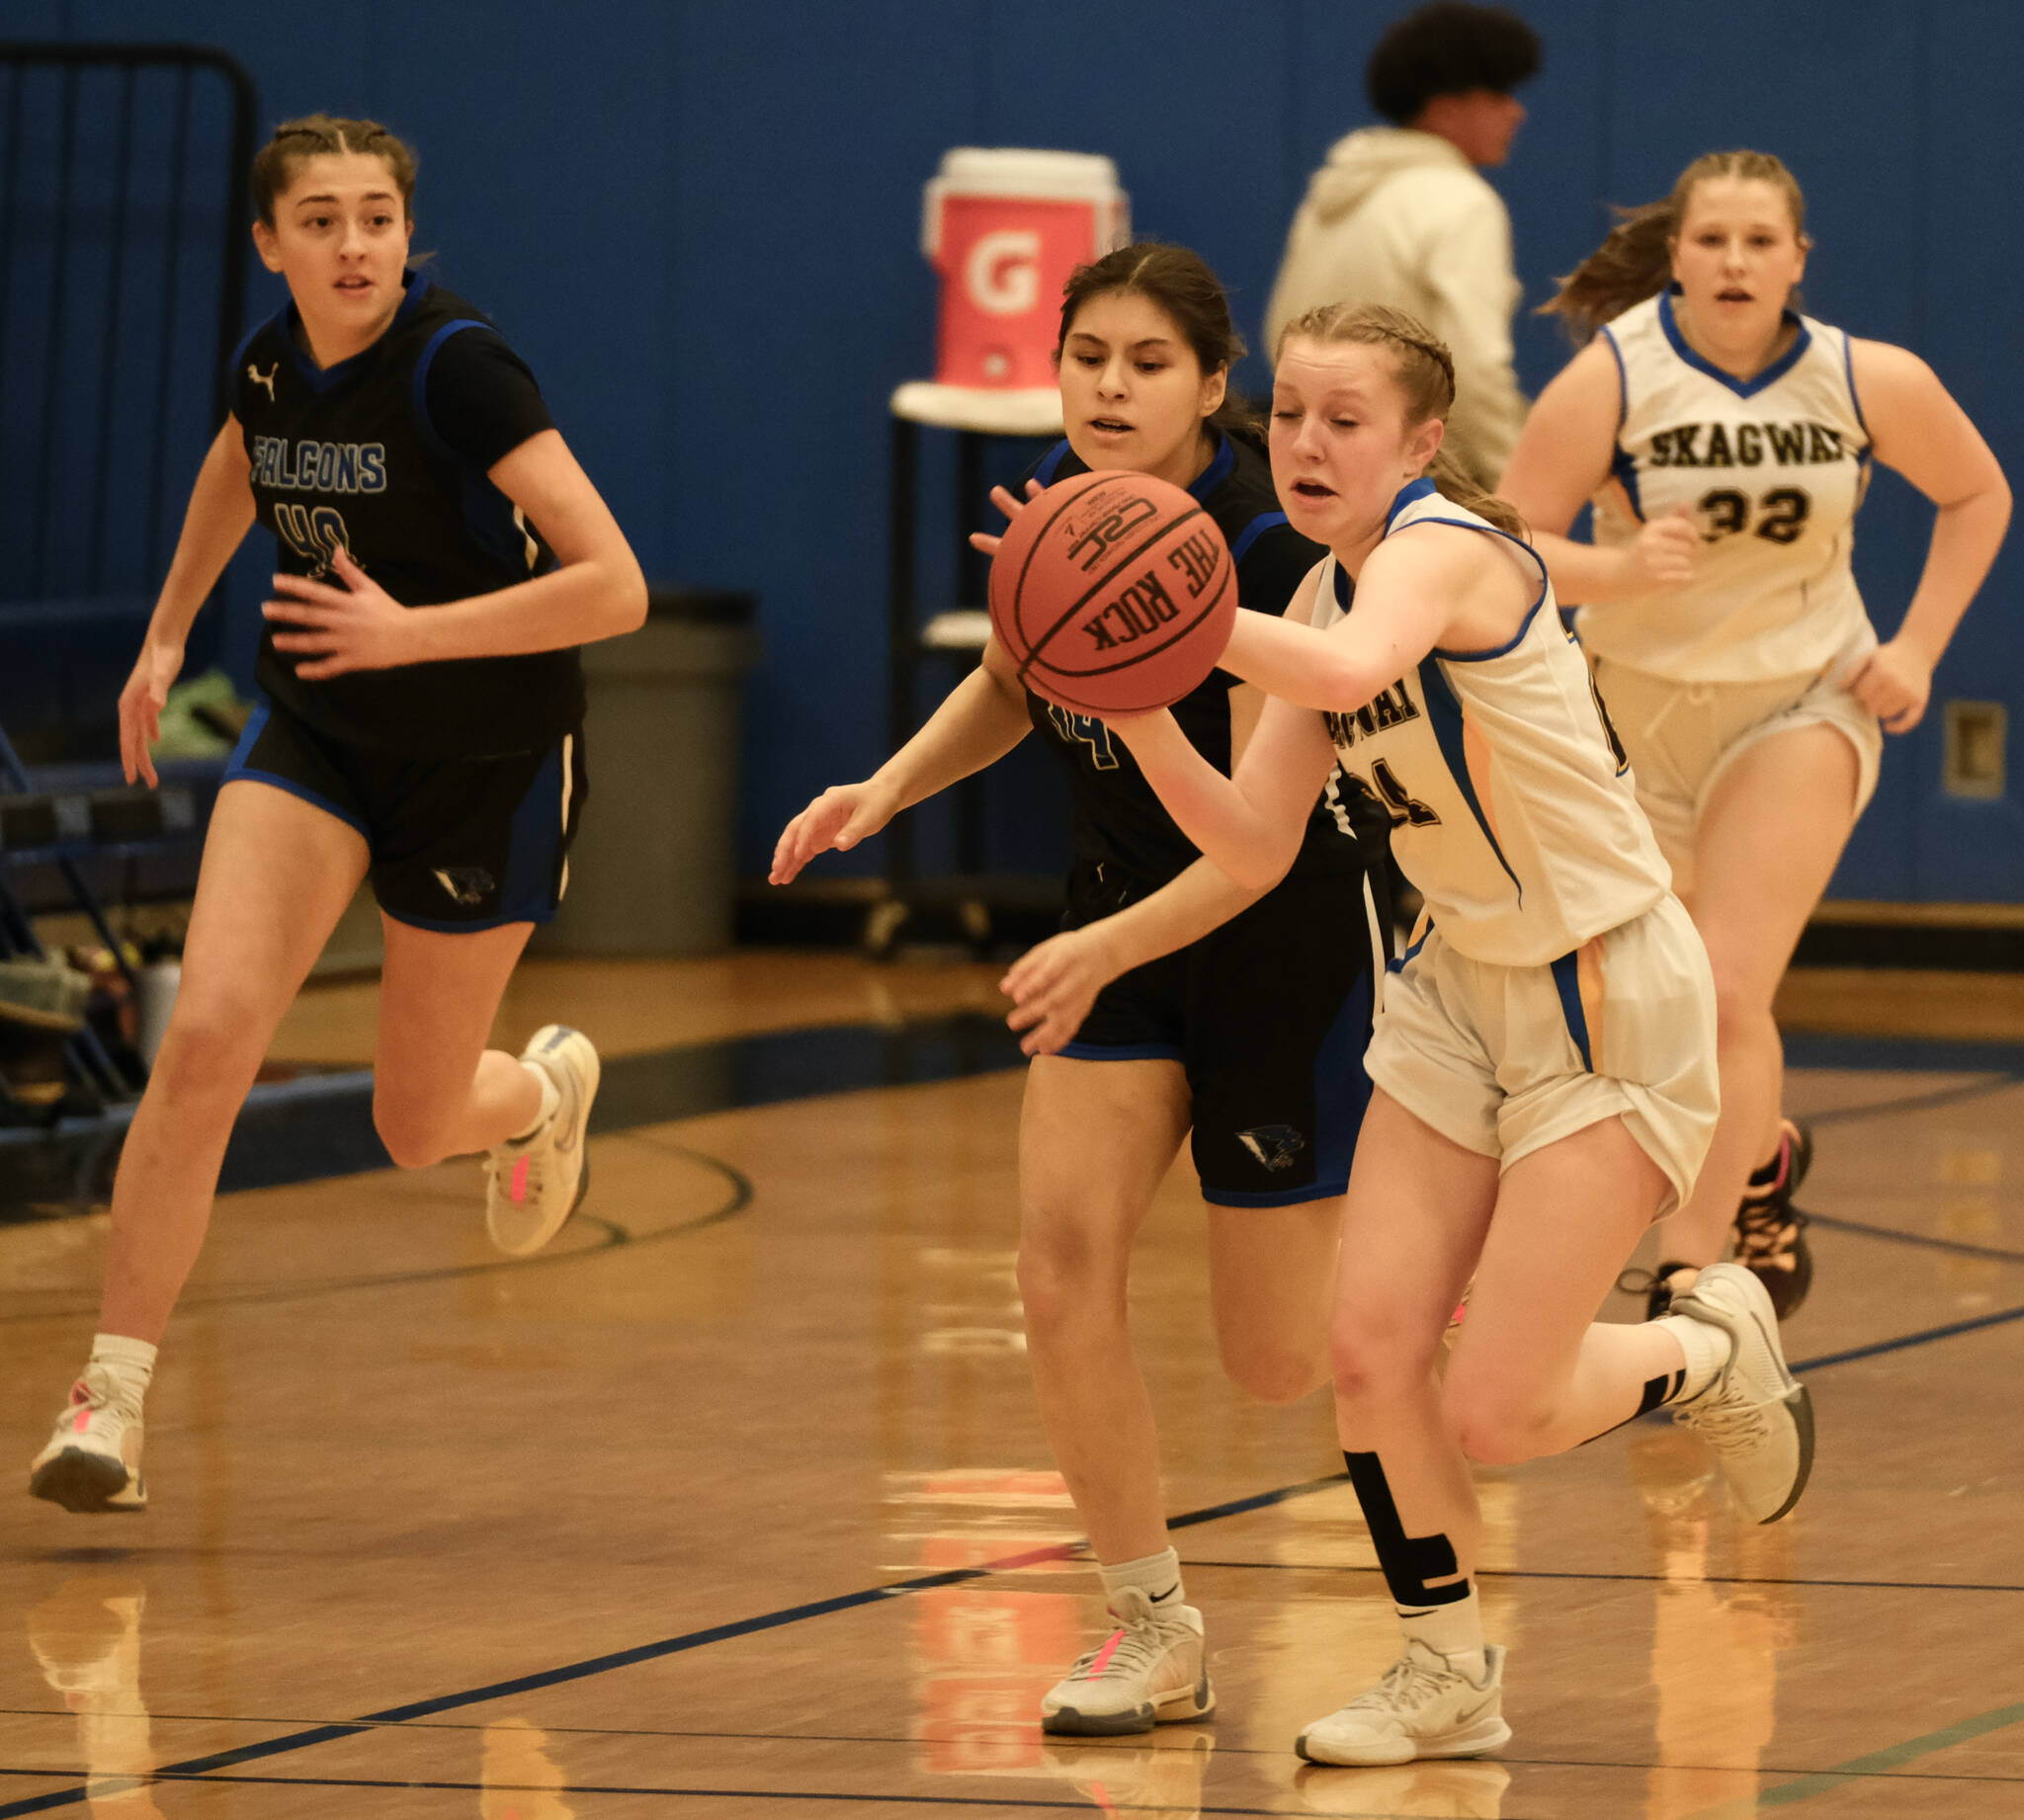 Skagway’s Kenadie Cox (24) steals a ball against the Thunder Mountain JV during the inaugural Elizabeth Peratrovich Women’s High School Basketball Invitational Tournament on Thursday at Thunder Mountain High School. The tournament runs through Saturday. (Klas Stolpe for the Juneau Empire)